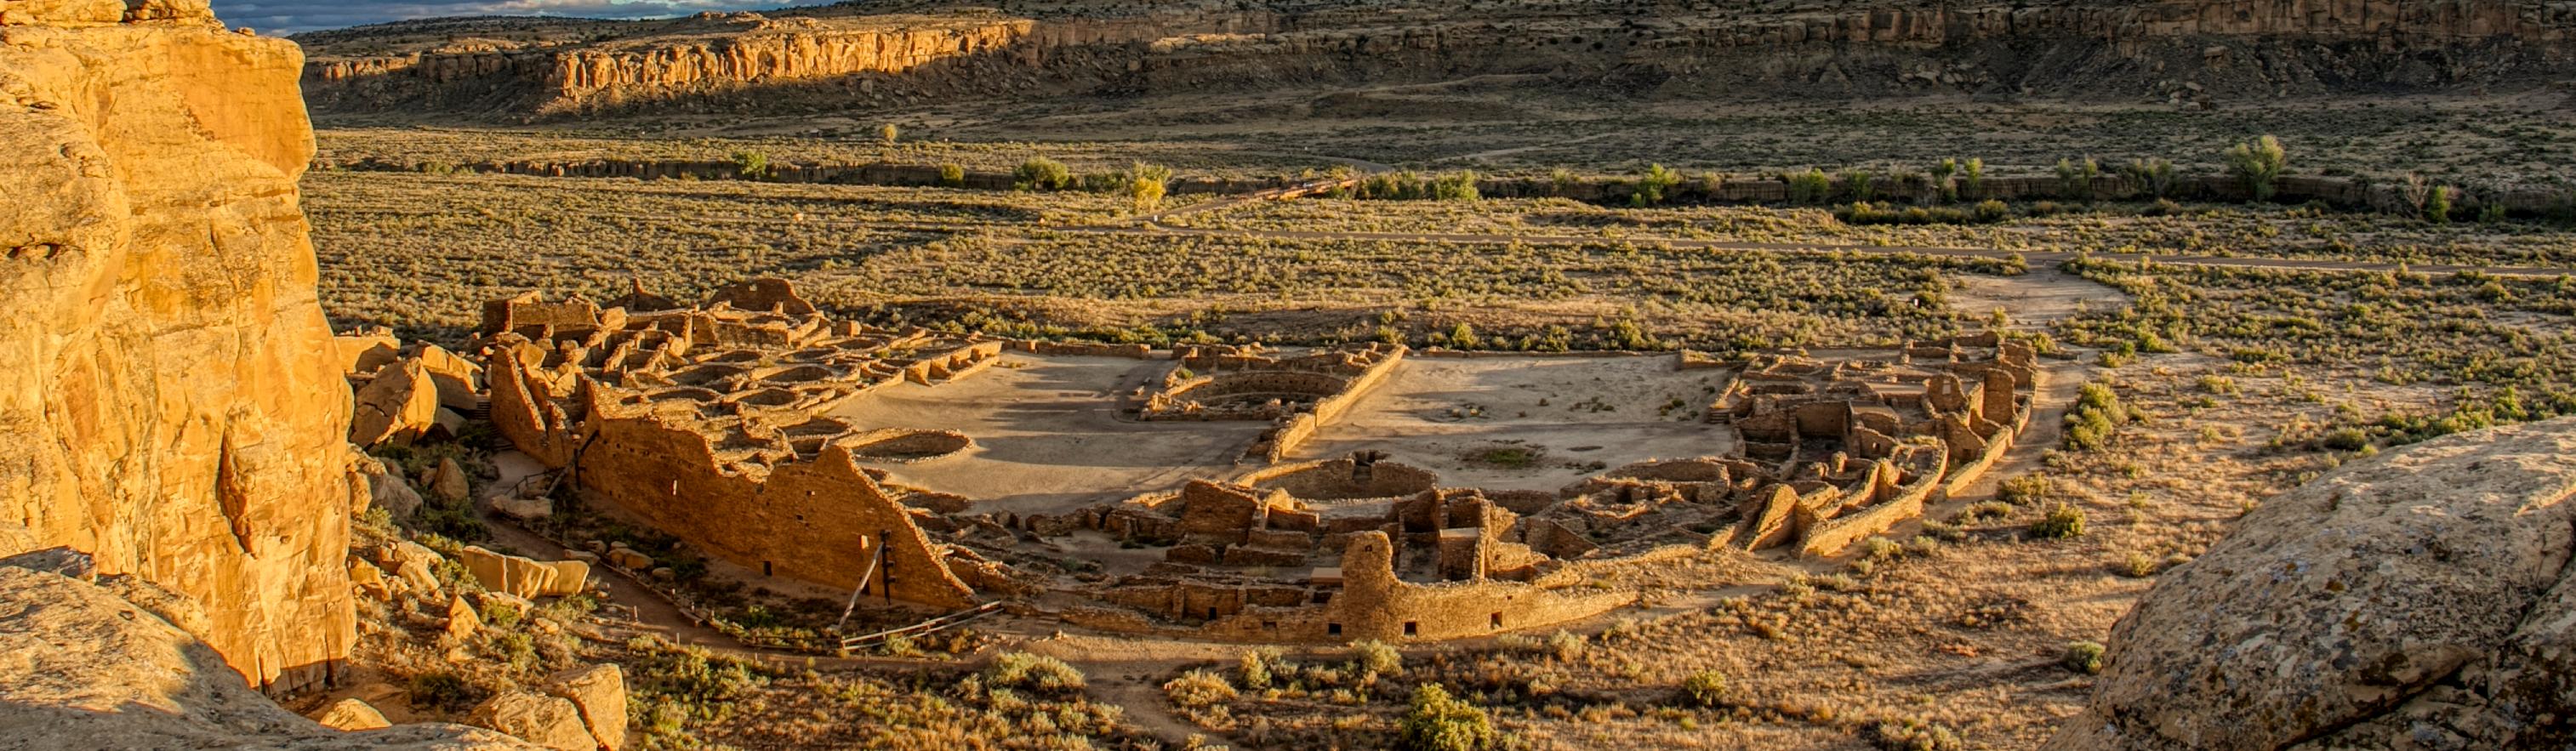 Chaco Culture National Historical Park (U.S. National Park Service)